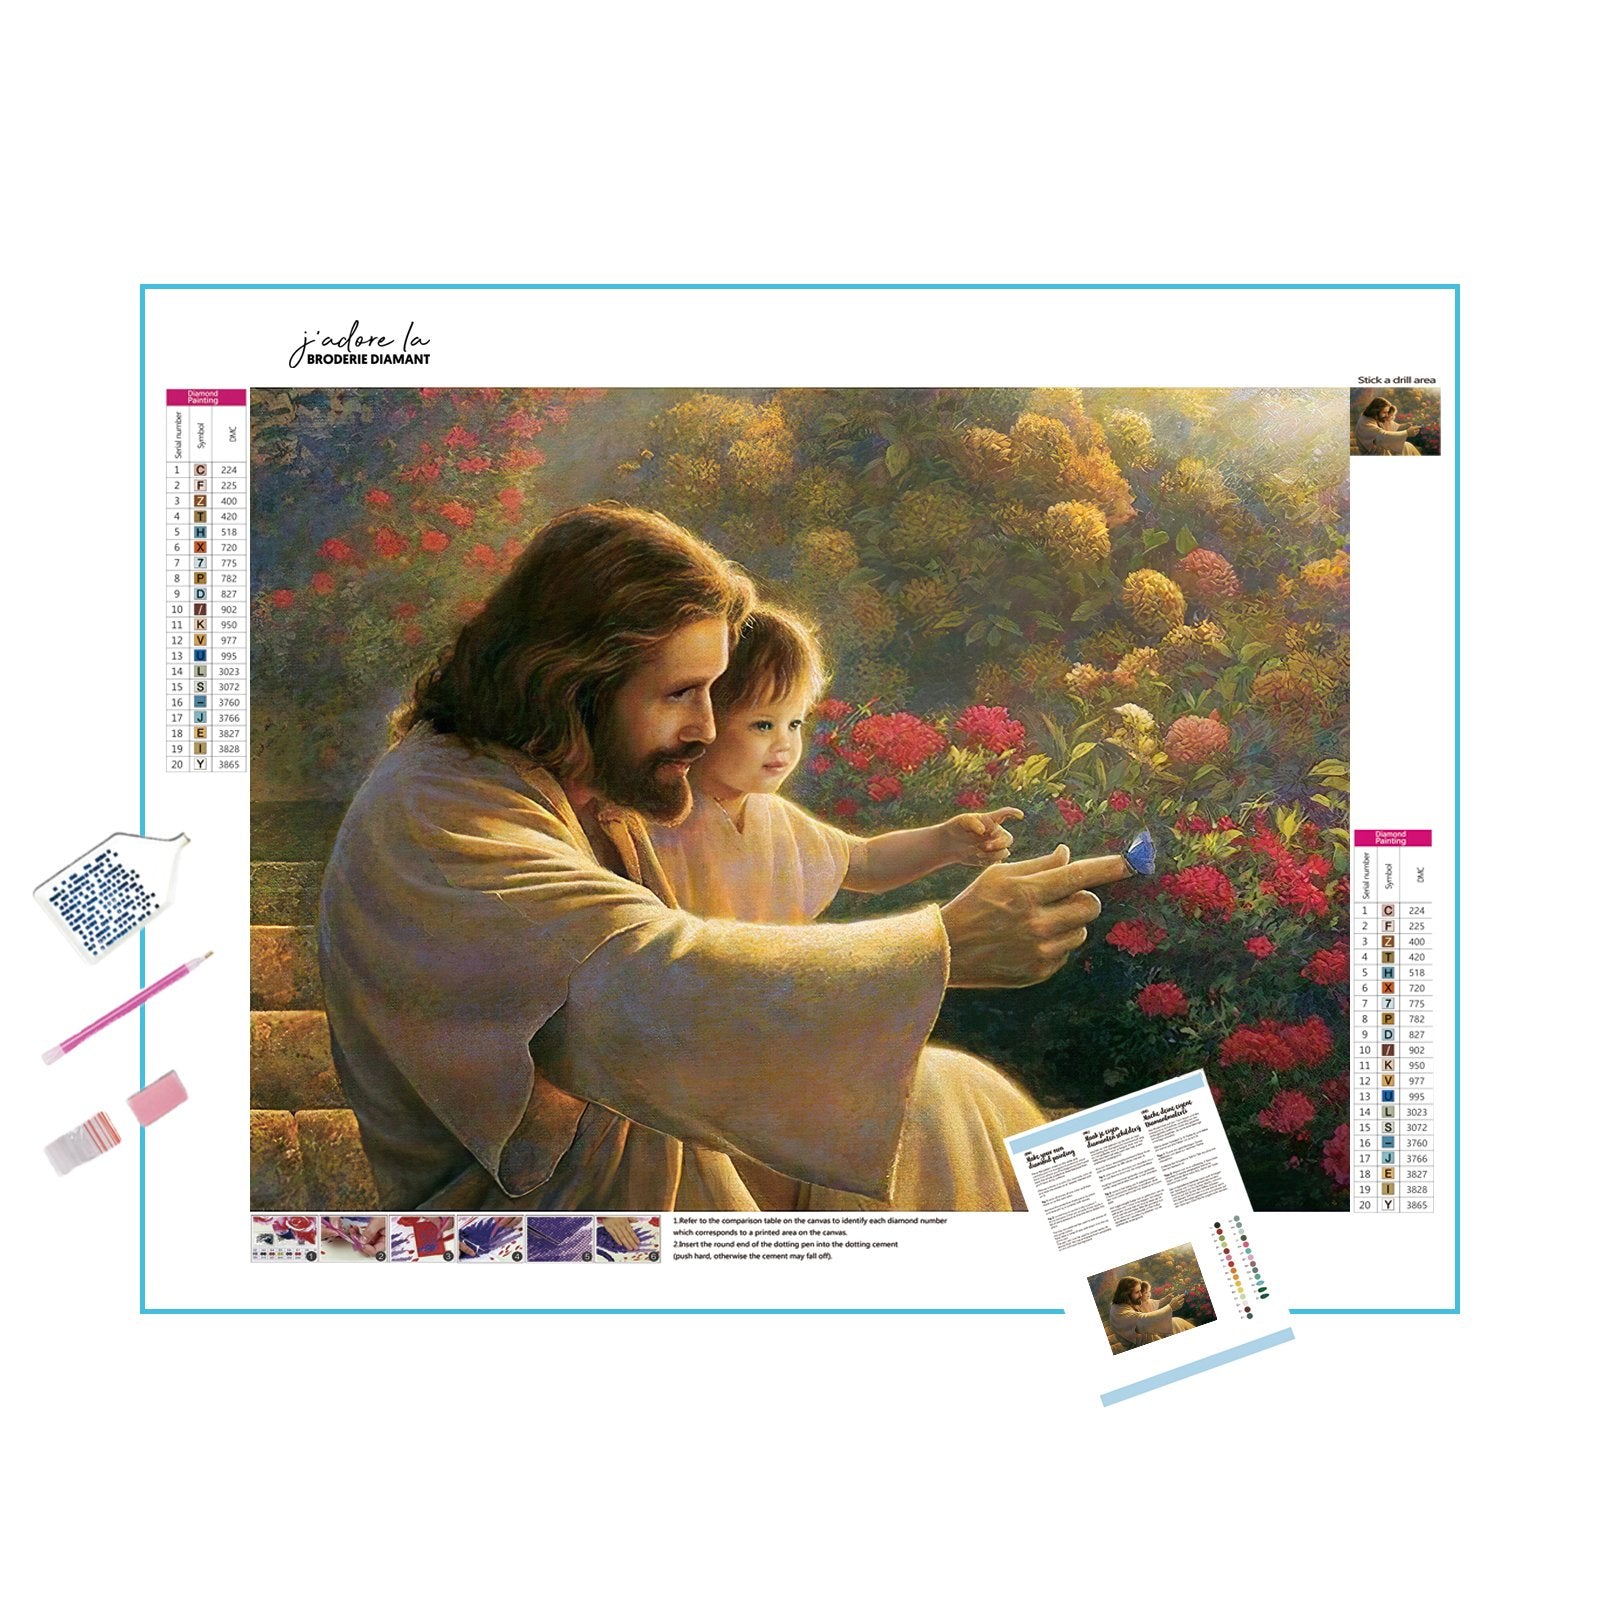 Feel divine warmth with Jesus and Baby amidst flowers. Jesus And Baby With Flowers - Diamondartlove